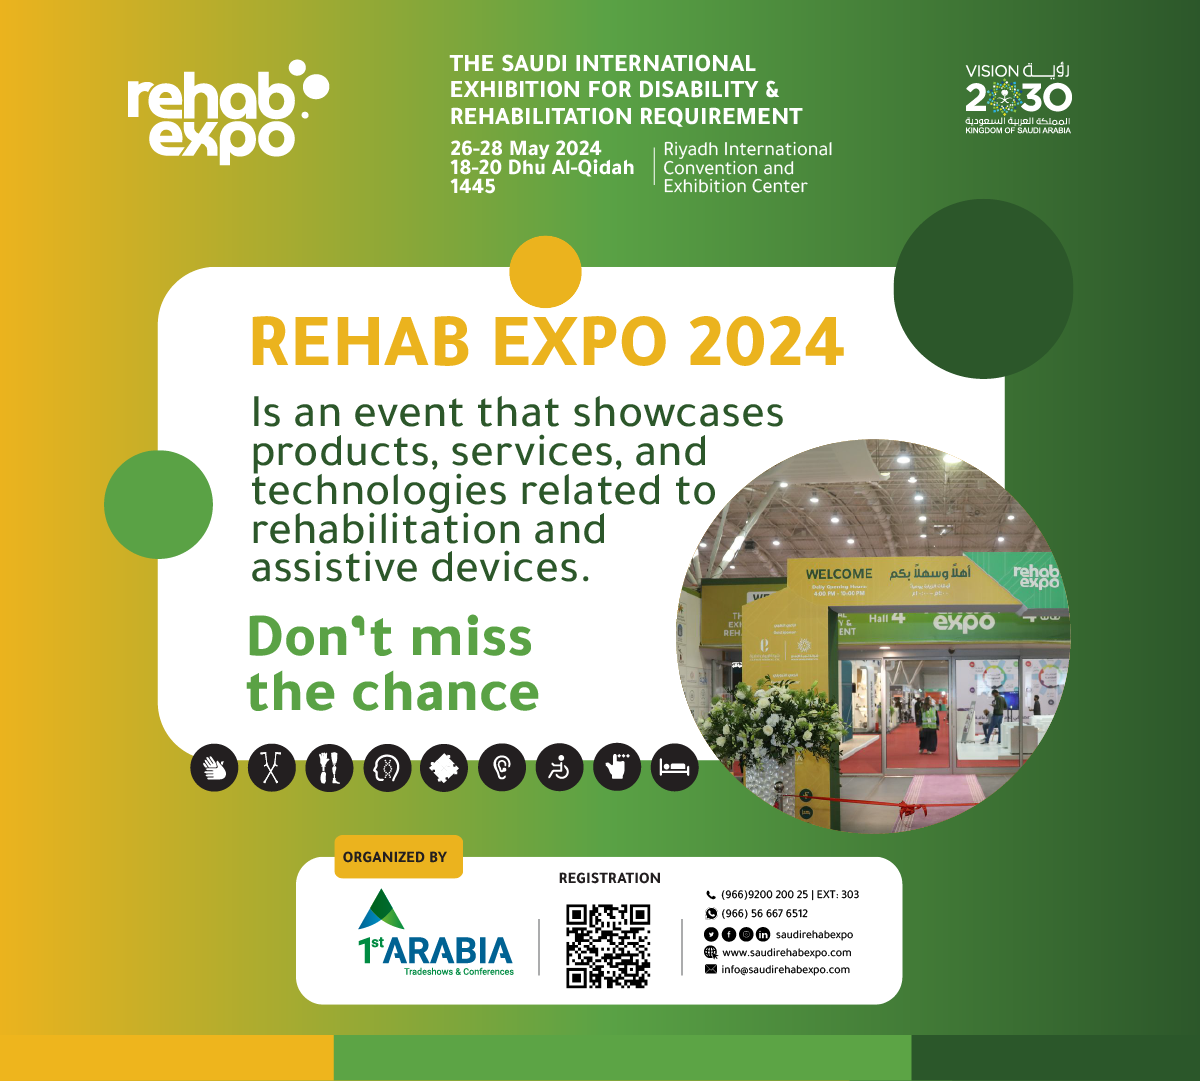 The Saudi International Exhibition for Disability and Rehabilitation Requirements 2024 is a great opportunity to display the latest innovations and technologies in the industry of rehabilitation for people with disabilities.